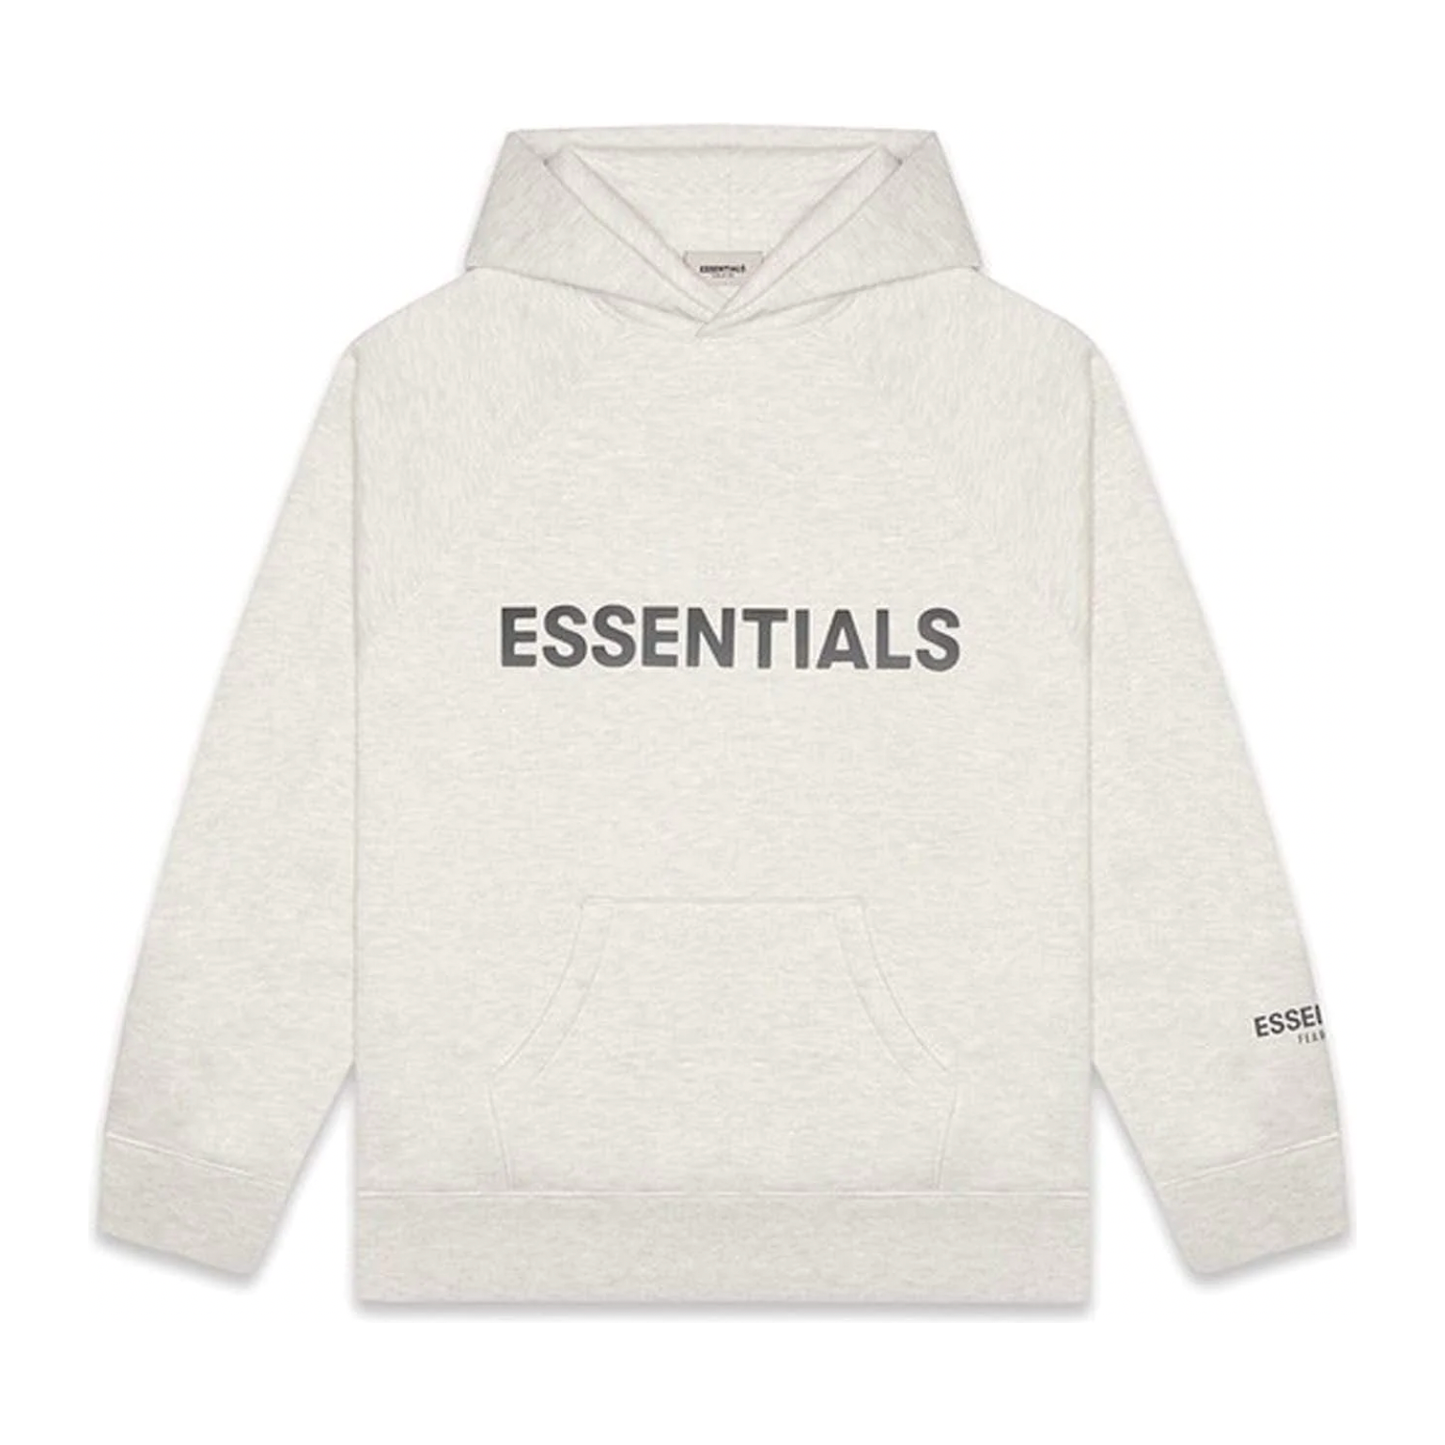 Fear of God Essentials 3D Silicon Applique Pullover Hoodie Oatmeal/Oatmeal Heather/Light Heather Oatmeal from Fear Of God